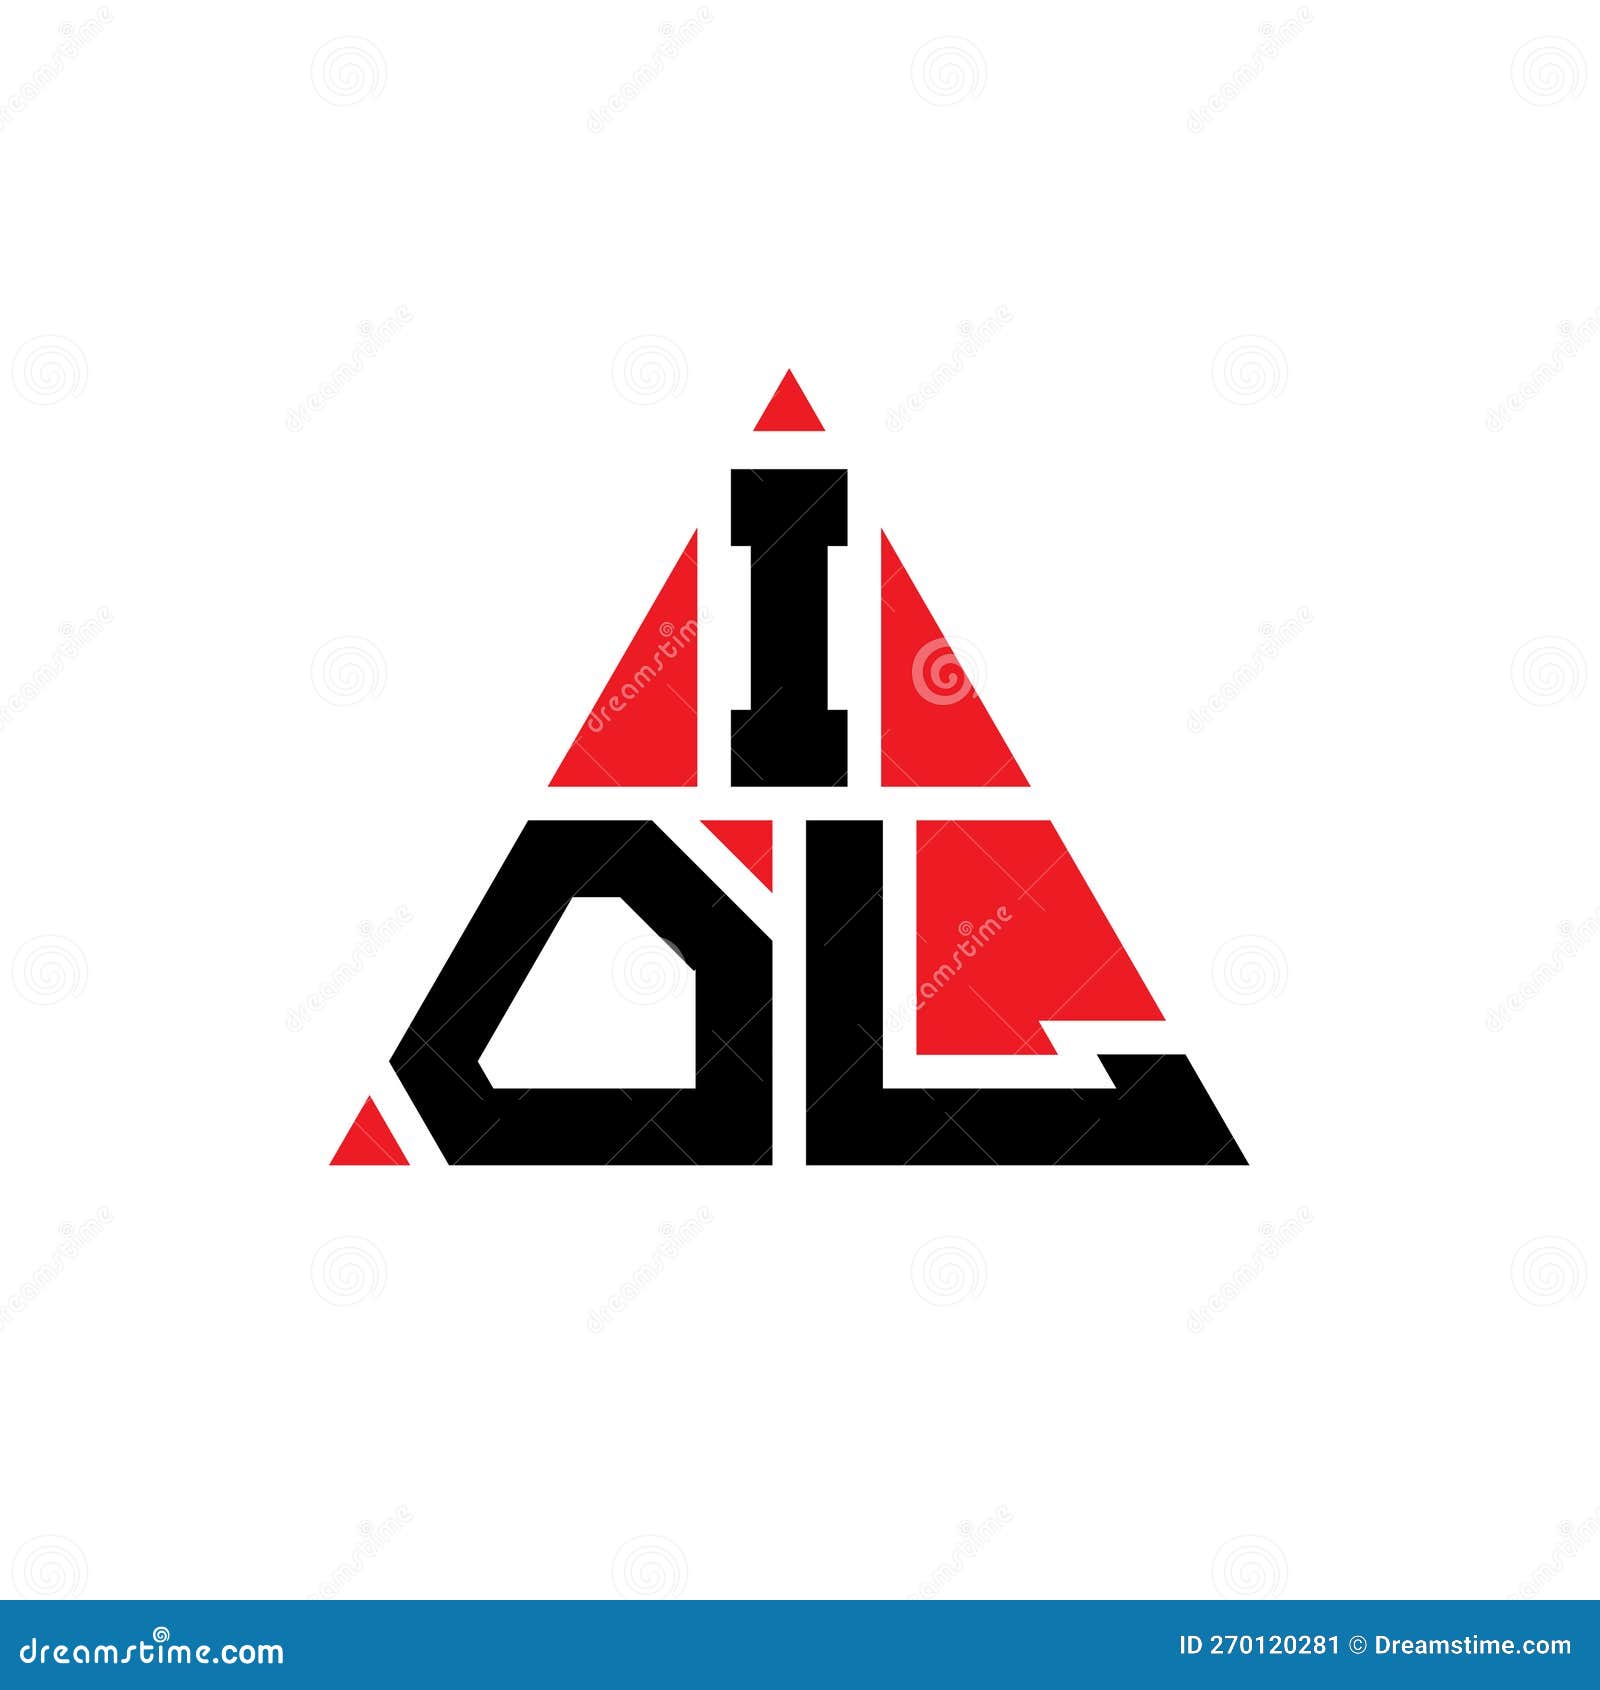 iom triangle letter logo  with triangle . iom triangle logo  monogram. iom triangle  logo template with red